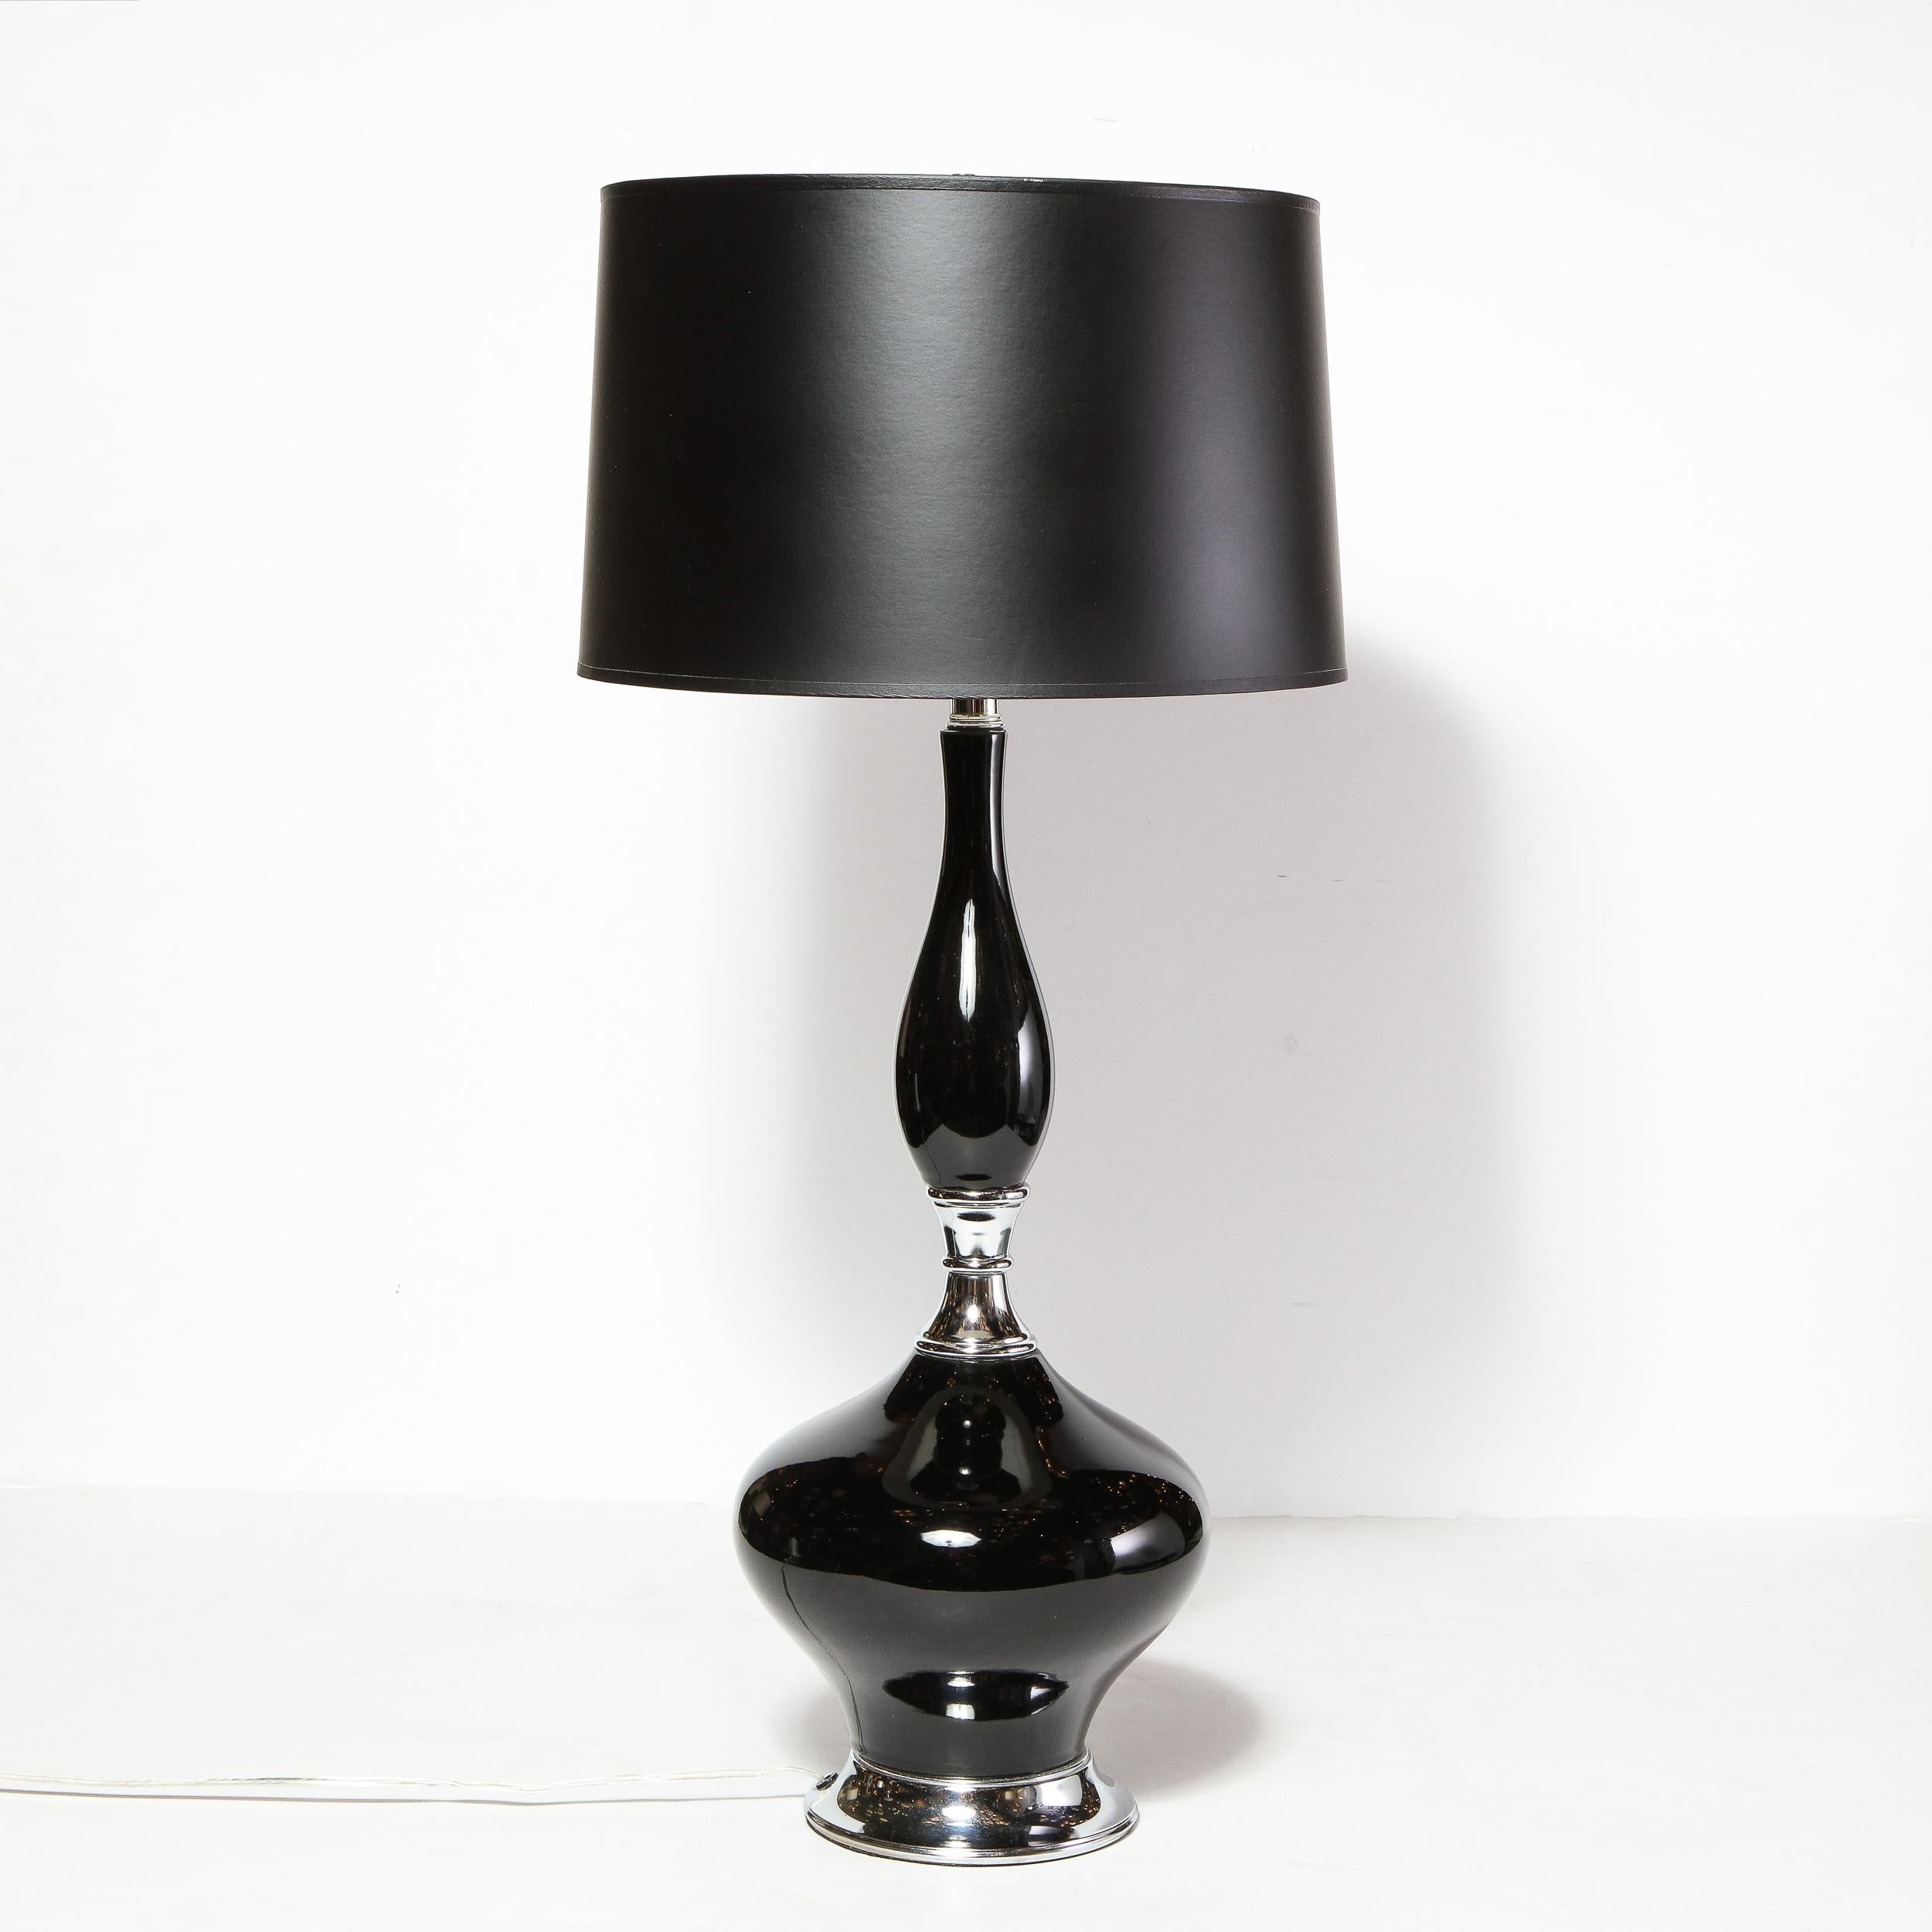 Pair of Mid-Century Modern Sculptural Black Glazed Ceramic Lamps w/ Chrome Bases For Sale 2